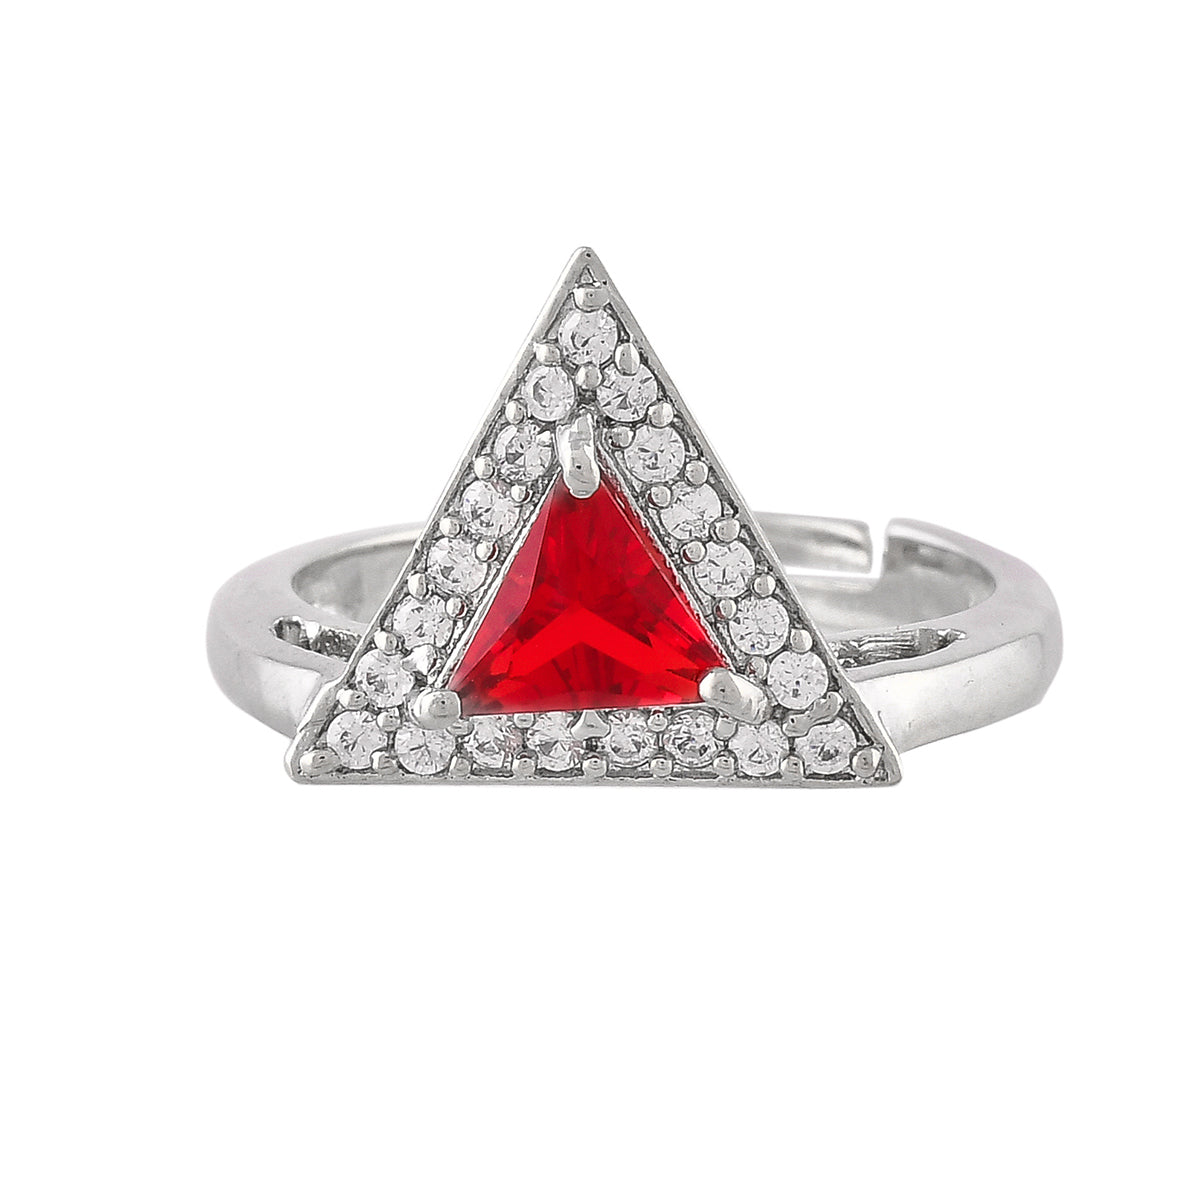 Buy Triangle ring, Ruby ring, Artisan silver ring, July birthstone online  at aStudio1980.com